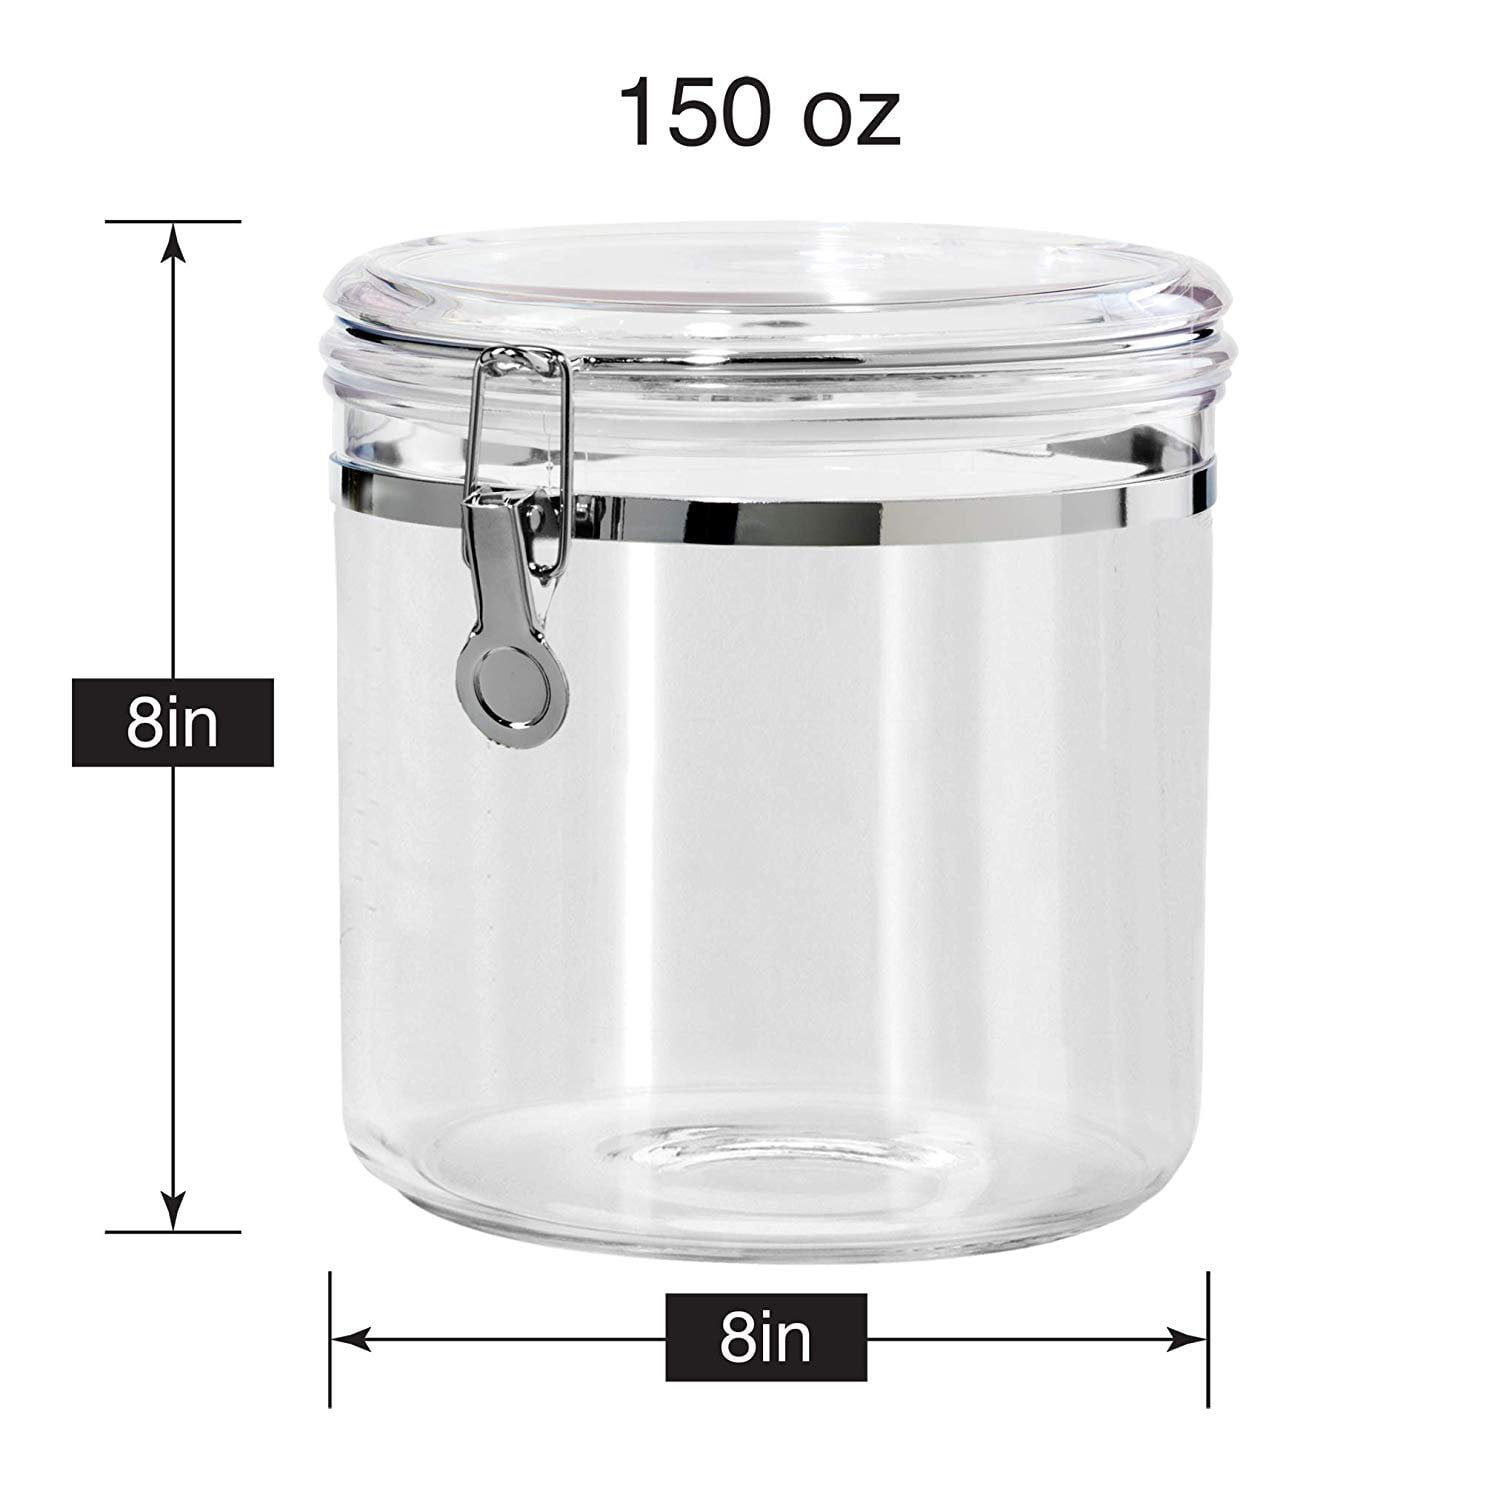 Oggi Stainless Steel Kitchen Canister 62 fl oz - Airtight Clamp Lid, Clear  See-Thru Top - Ideal for Kitchen Storage, Food Storage, Pantry Storage.